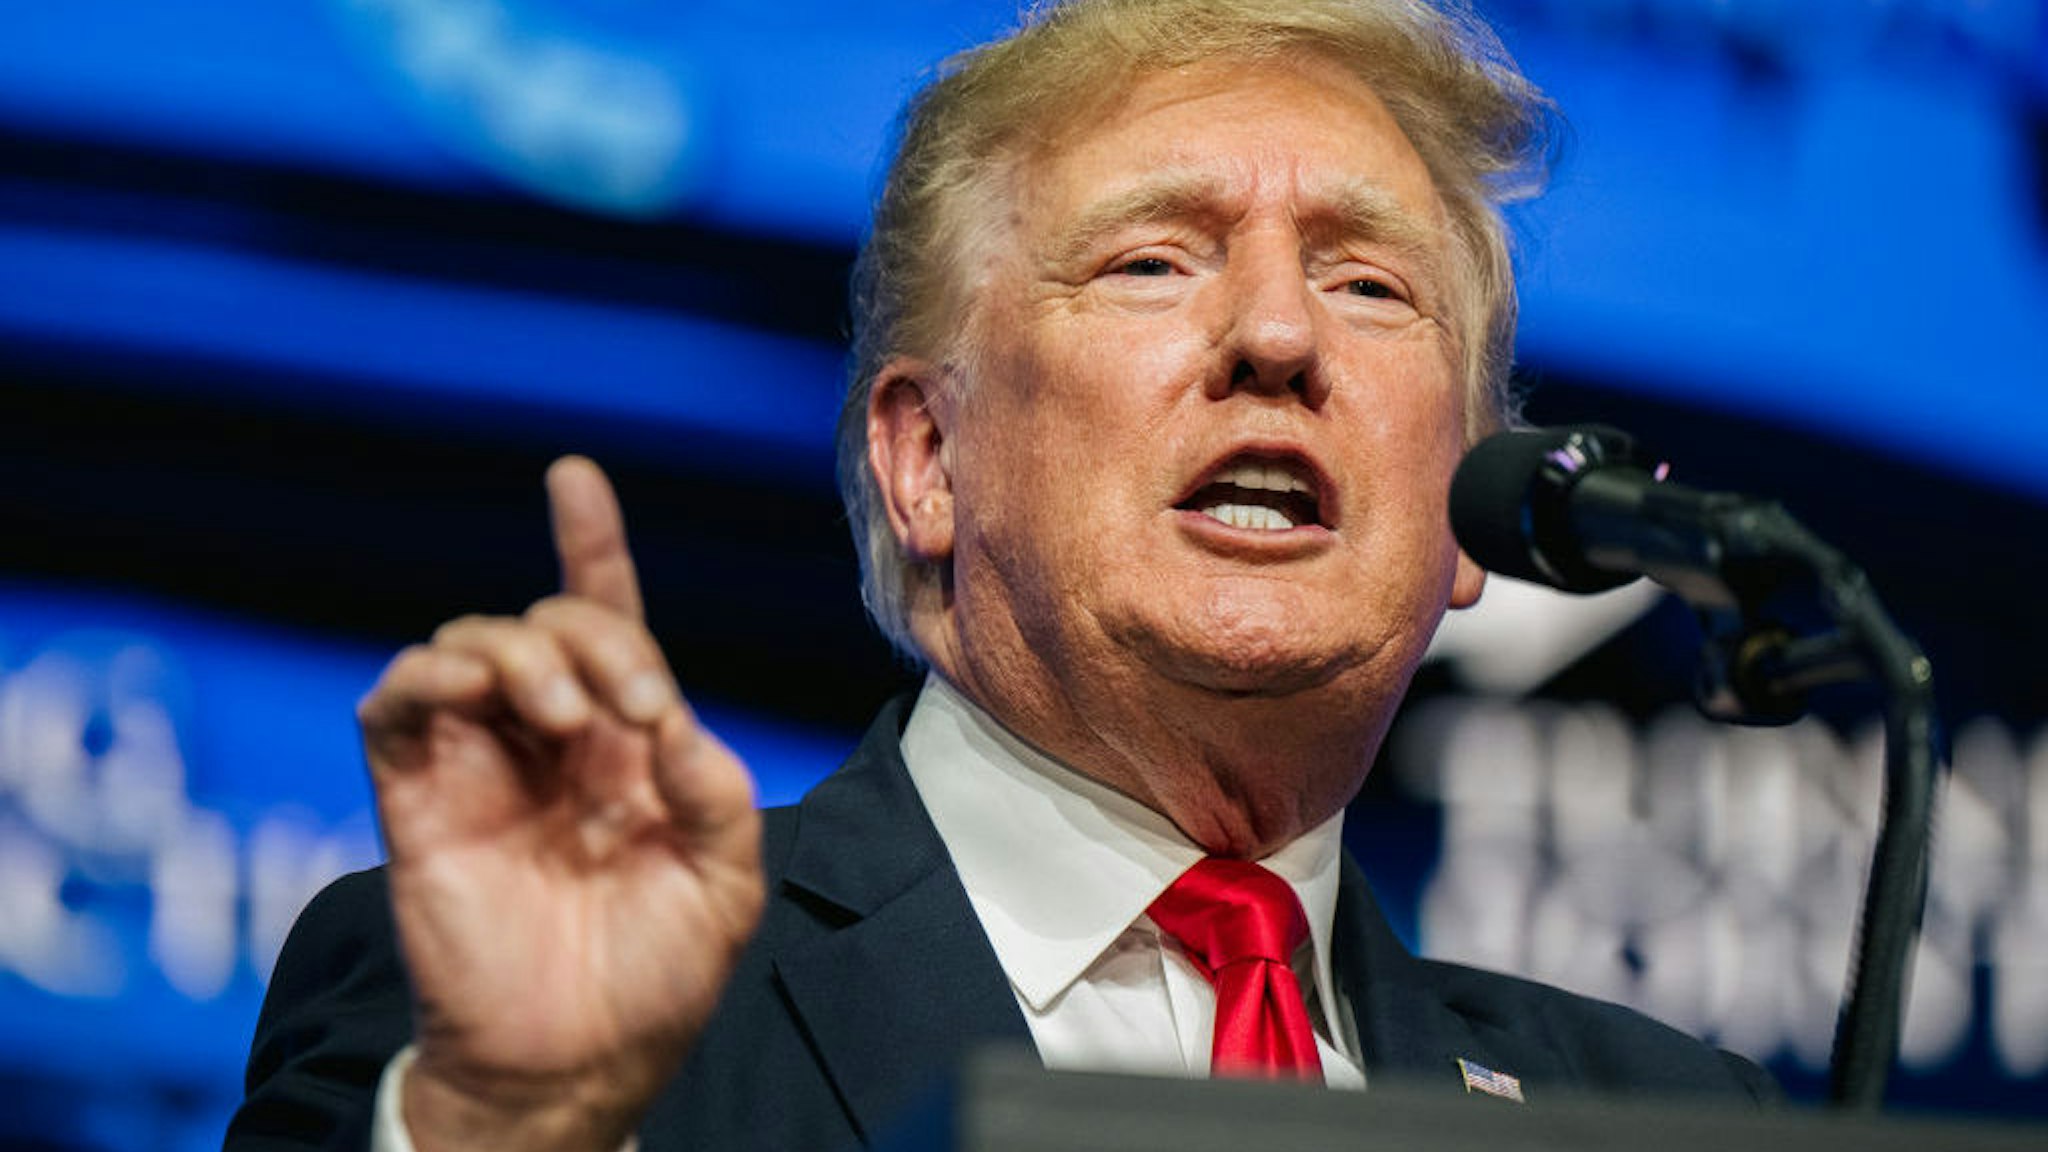 PHOENIX, ARIZONA - JULY 24: Former U.S. President Donald Trump speaks during the Rally To Protect Our Elections conference on July 24, 2021 in Phoenix, Arizona. The Phoenix-based political organization Turning Point Action hosted former President Donald Trump alongside GOP Arizona candidates who have begun candidacy for government elected roles. (Photo by Brandon Bell/Getty Images)